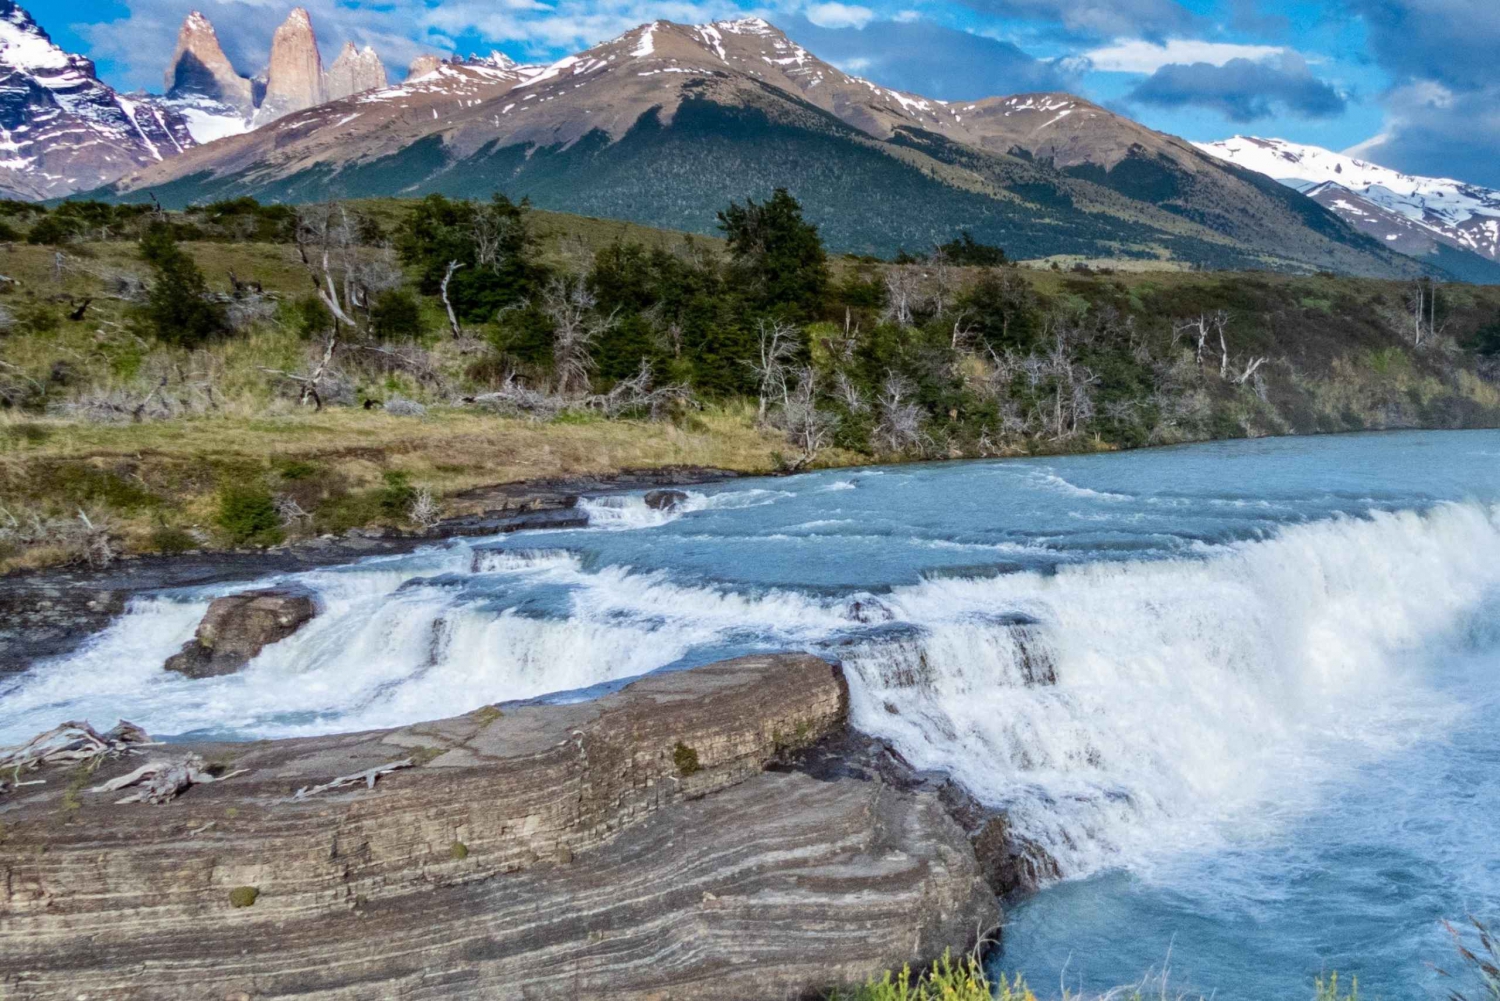 Puerto Natales: Torres del Paine Lookout and Hiking Trip